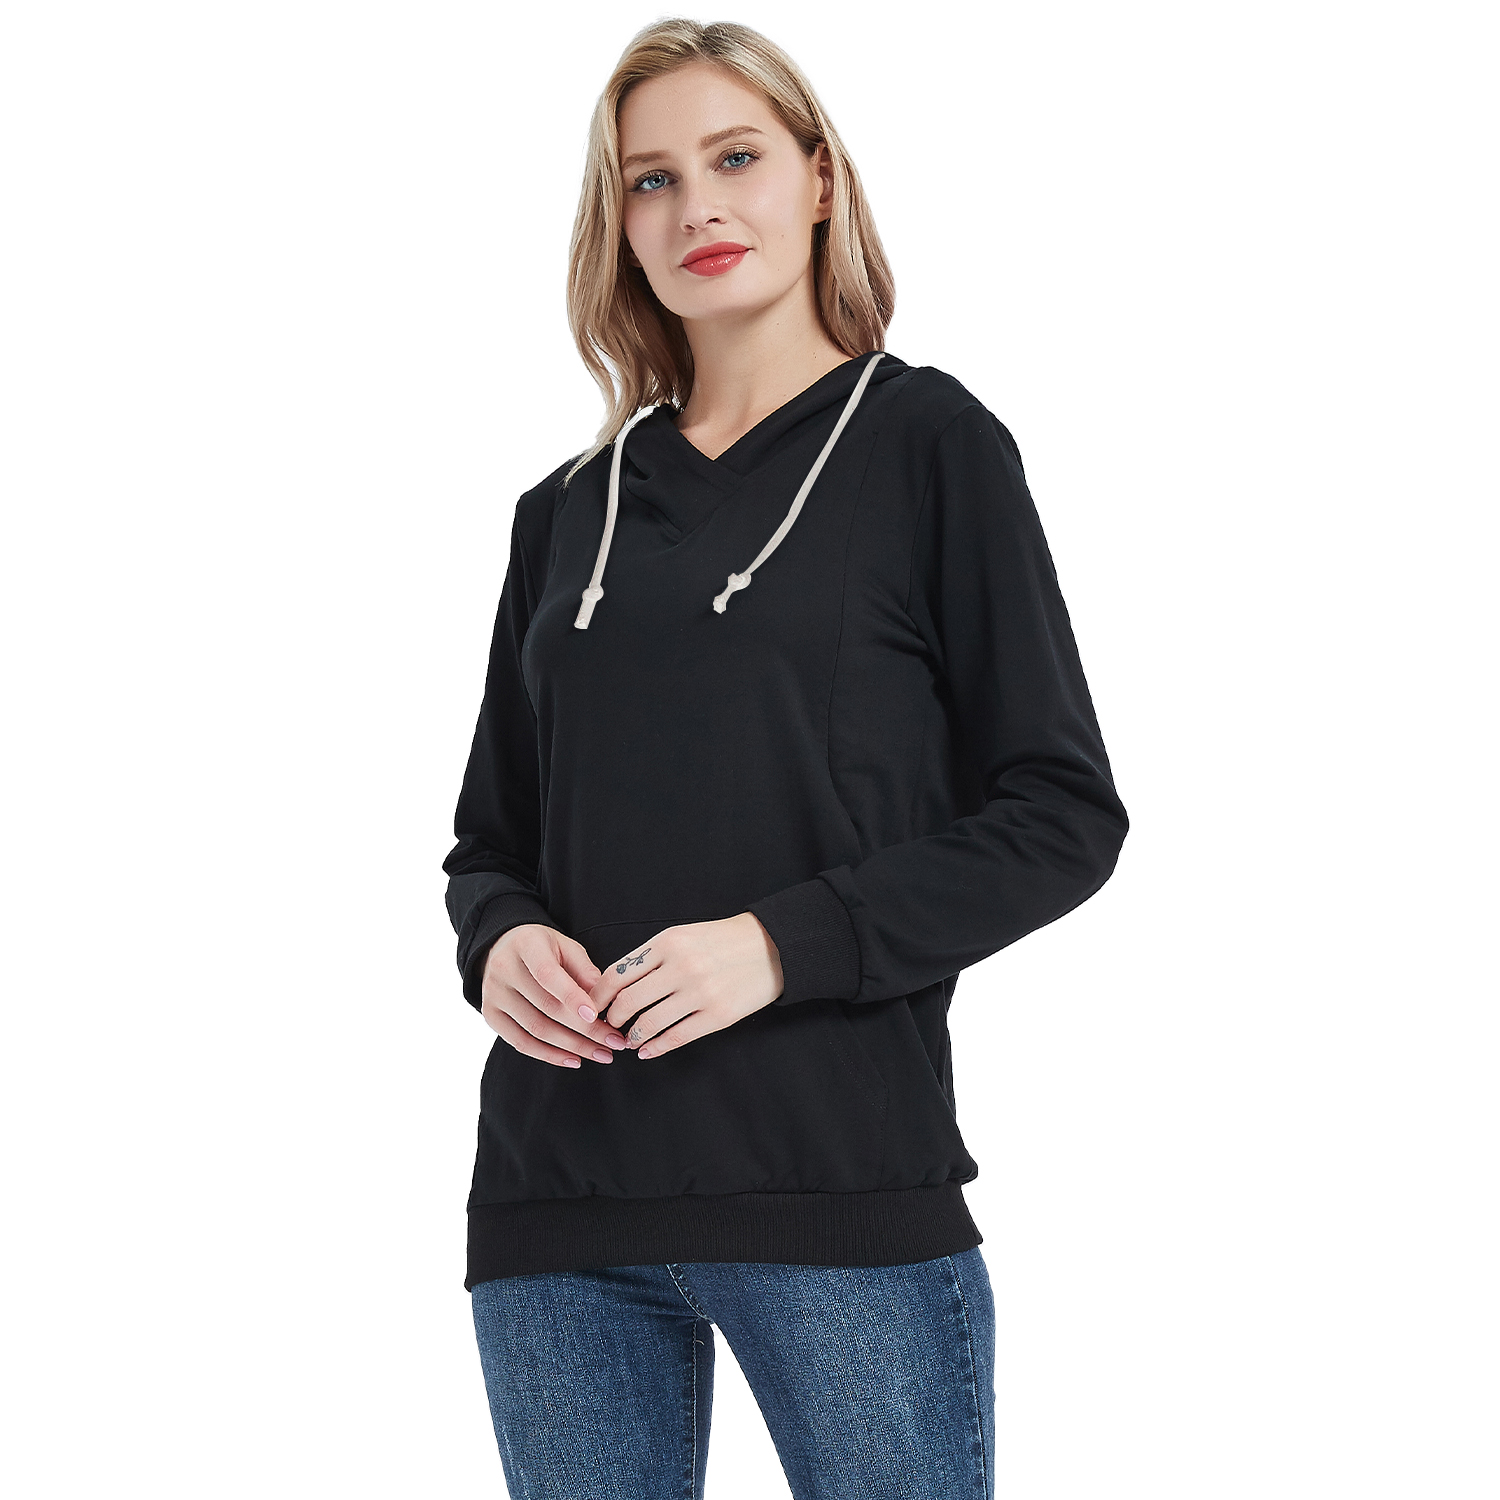 Bhome Maternity Hoodies Long Sleeve Pregnancy Shirt Sweatshirts Maternity Tops with Side Zip Up 